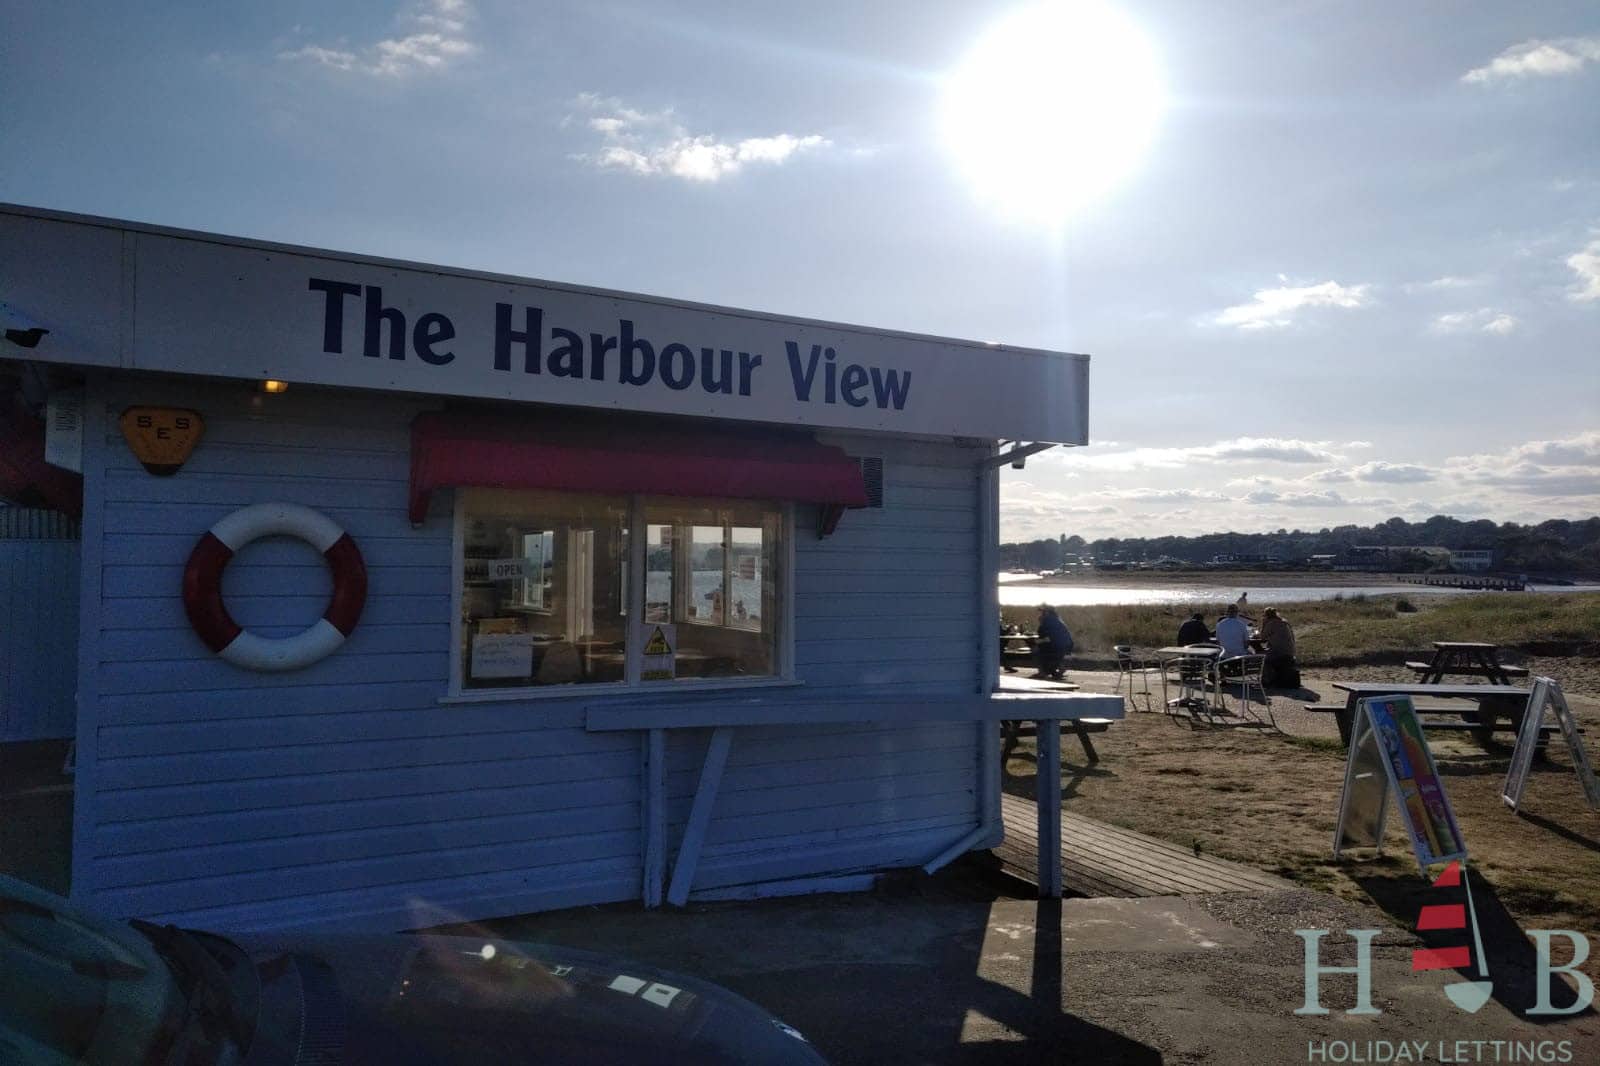 The Harbour View